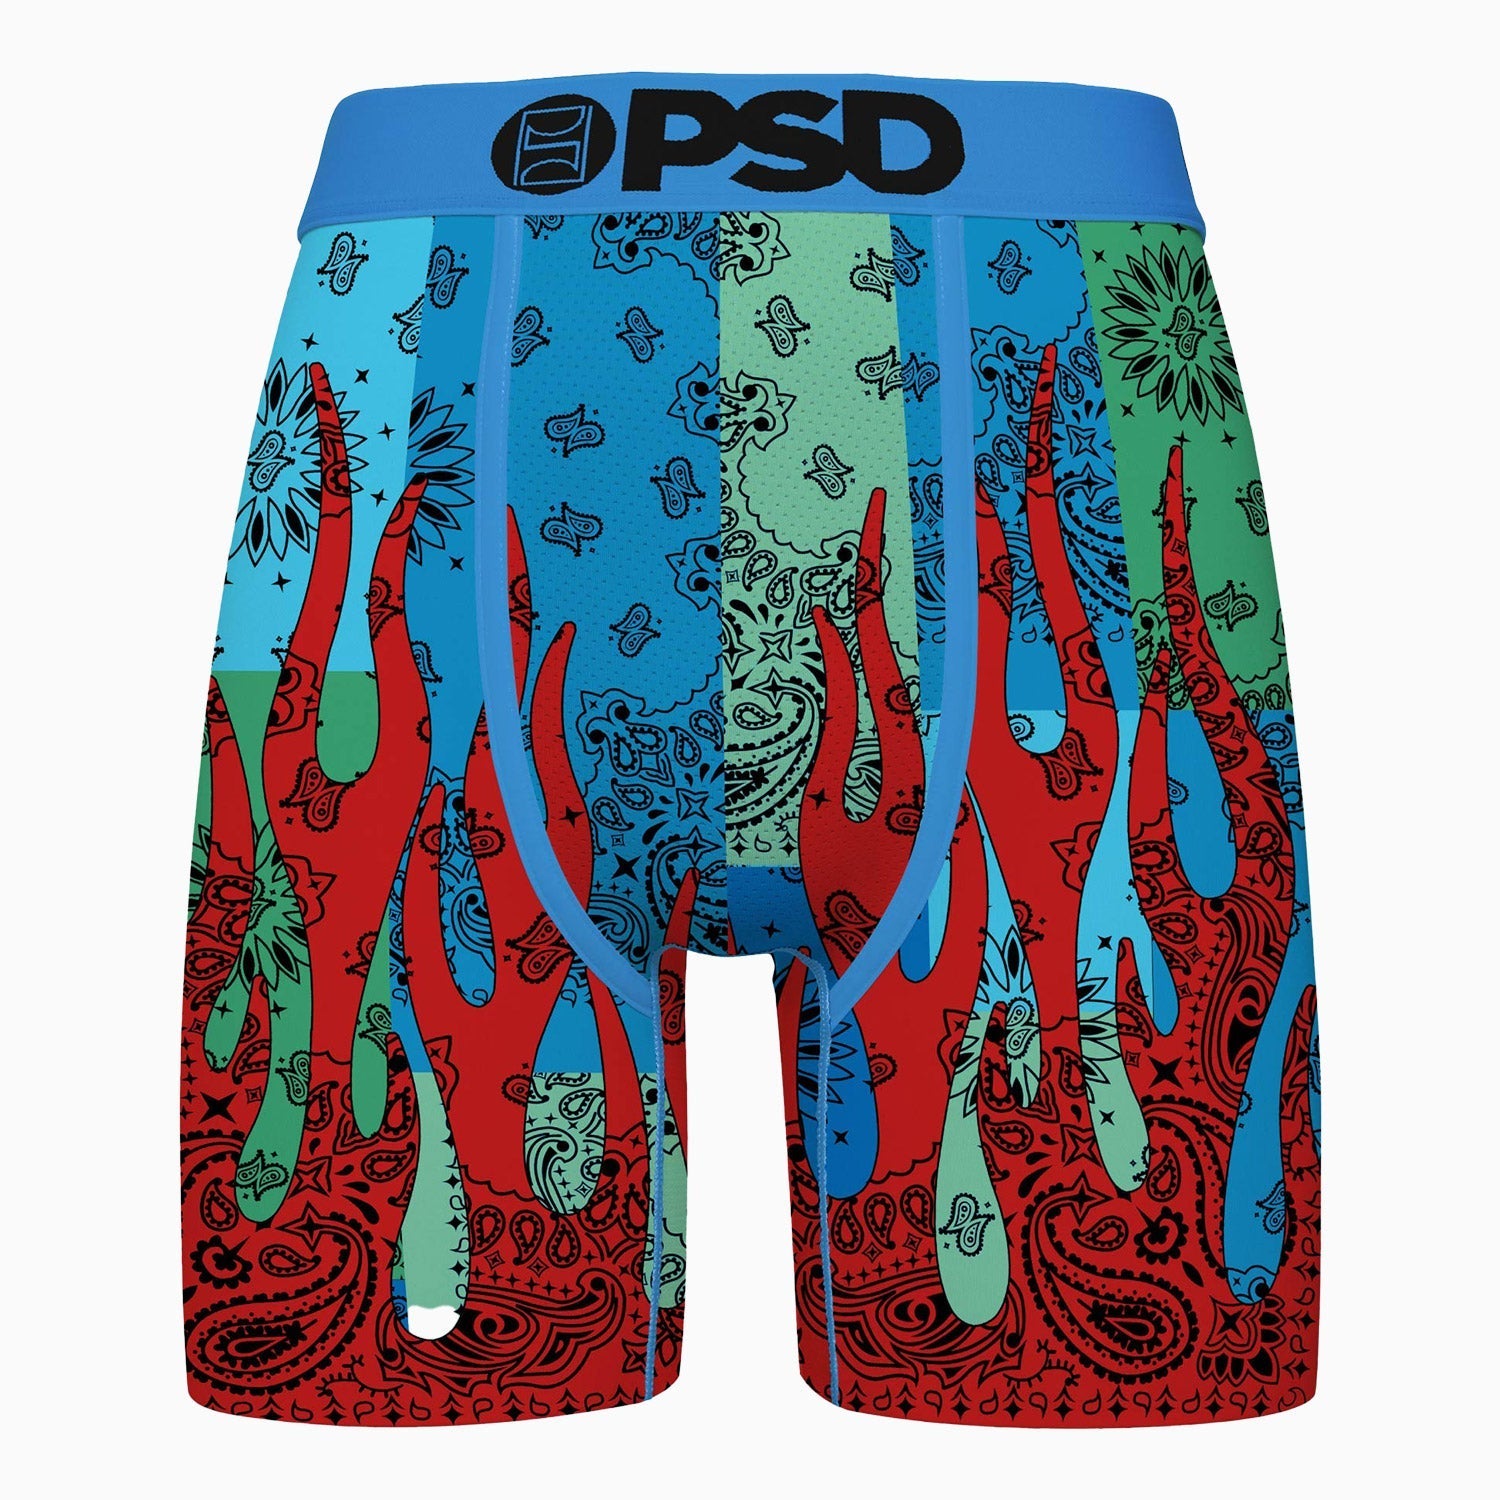 PSD Underwear Men's Cool Bandana Flames Boxers - Color: Multi - Tops and Bottoms USA -